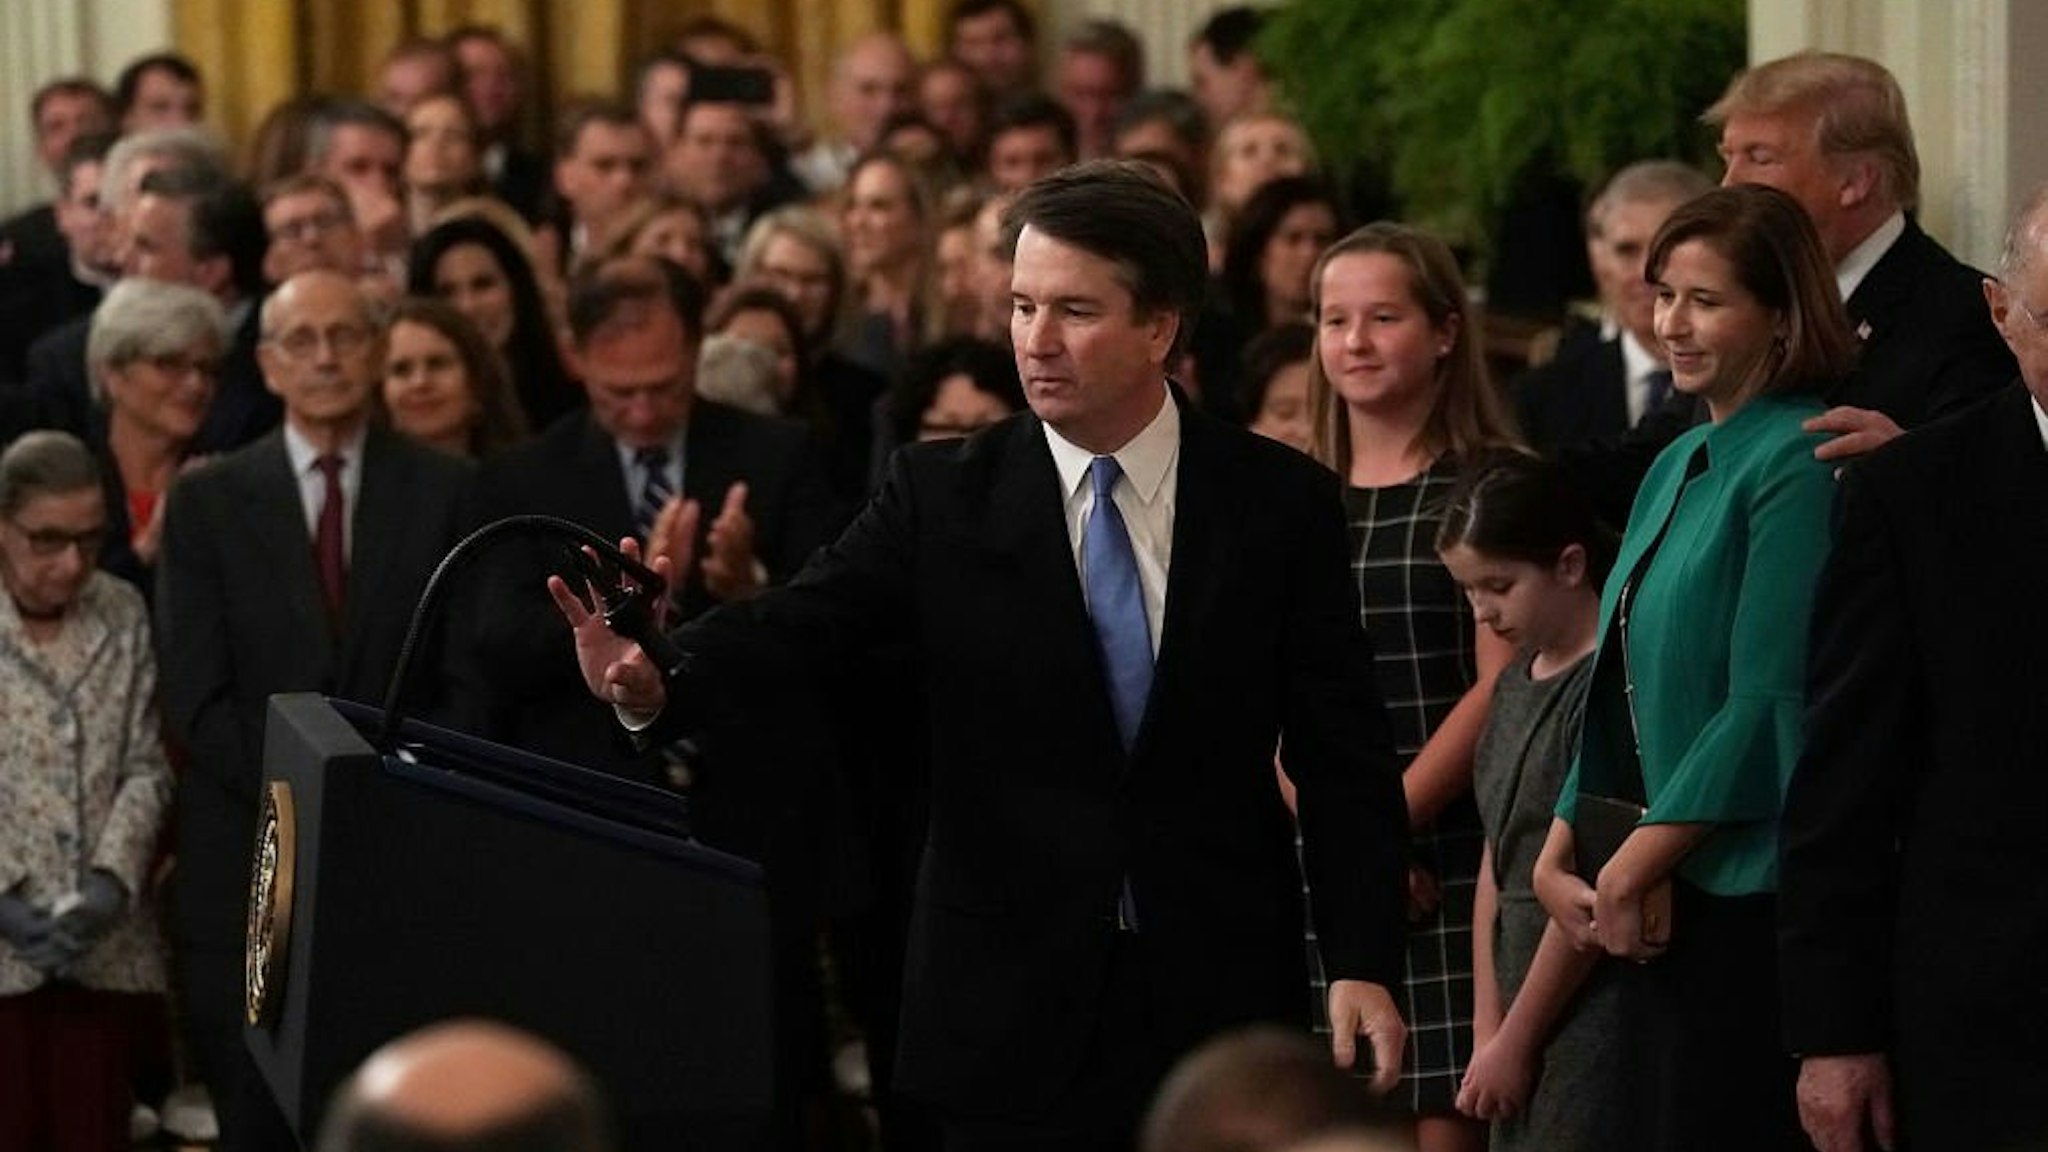 U.S. Supreme Court Justice Brett Kavanaugh (C) takes the podium as his wife Ashley (2nd R), daughters Liza (4th R) and Margaret (3rd R), and President Donald Trump (R) look on during a ceremonial swearing in at the White House October 8, 2018.